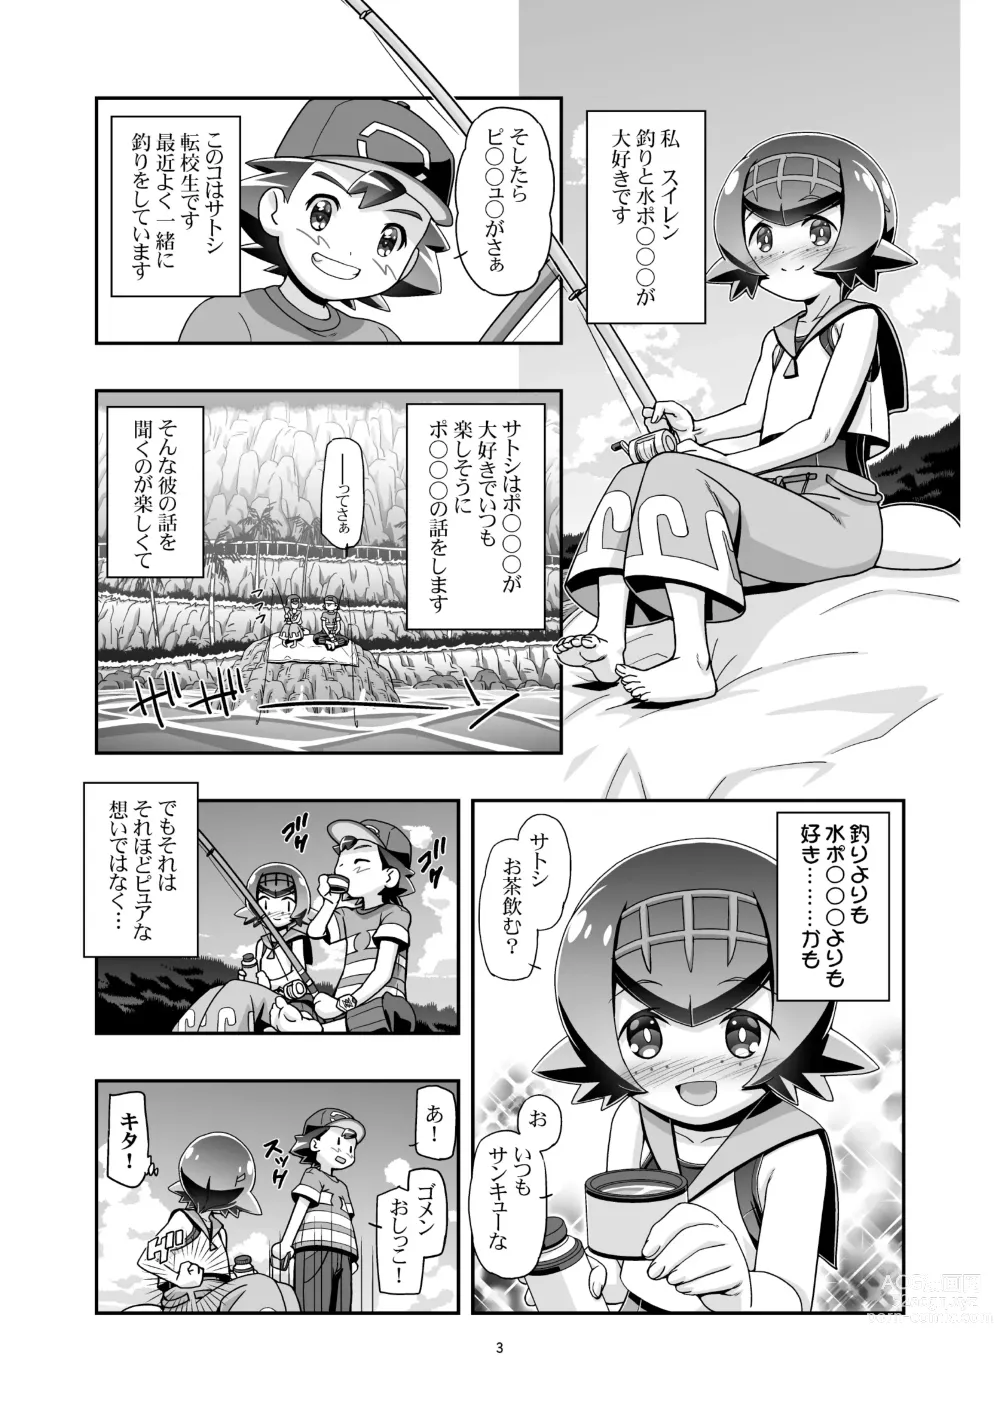 Page 2 of doujinshi PM GALS SUNMOON